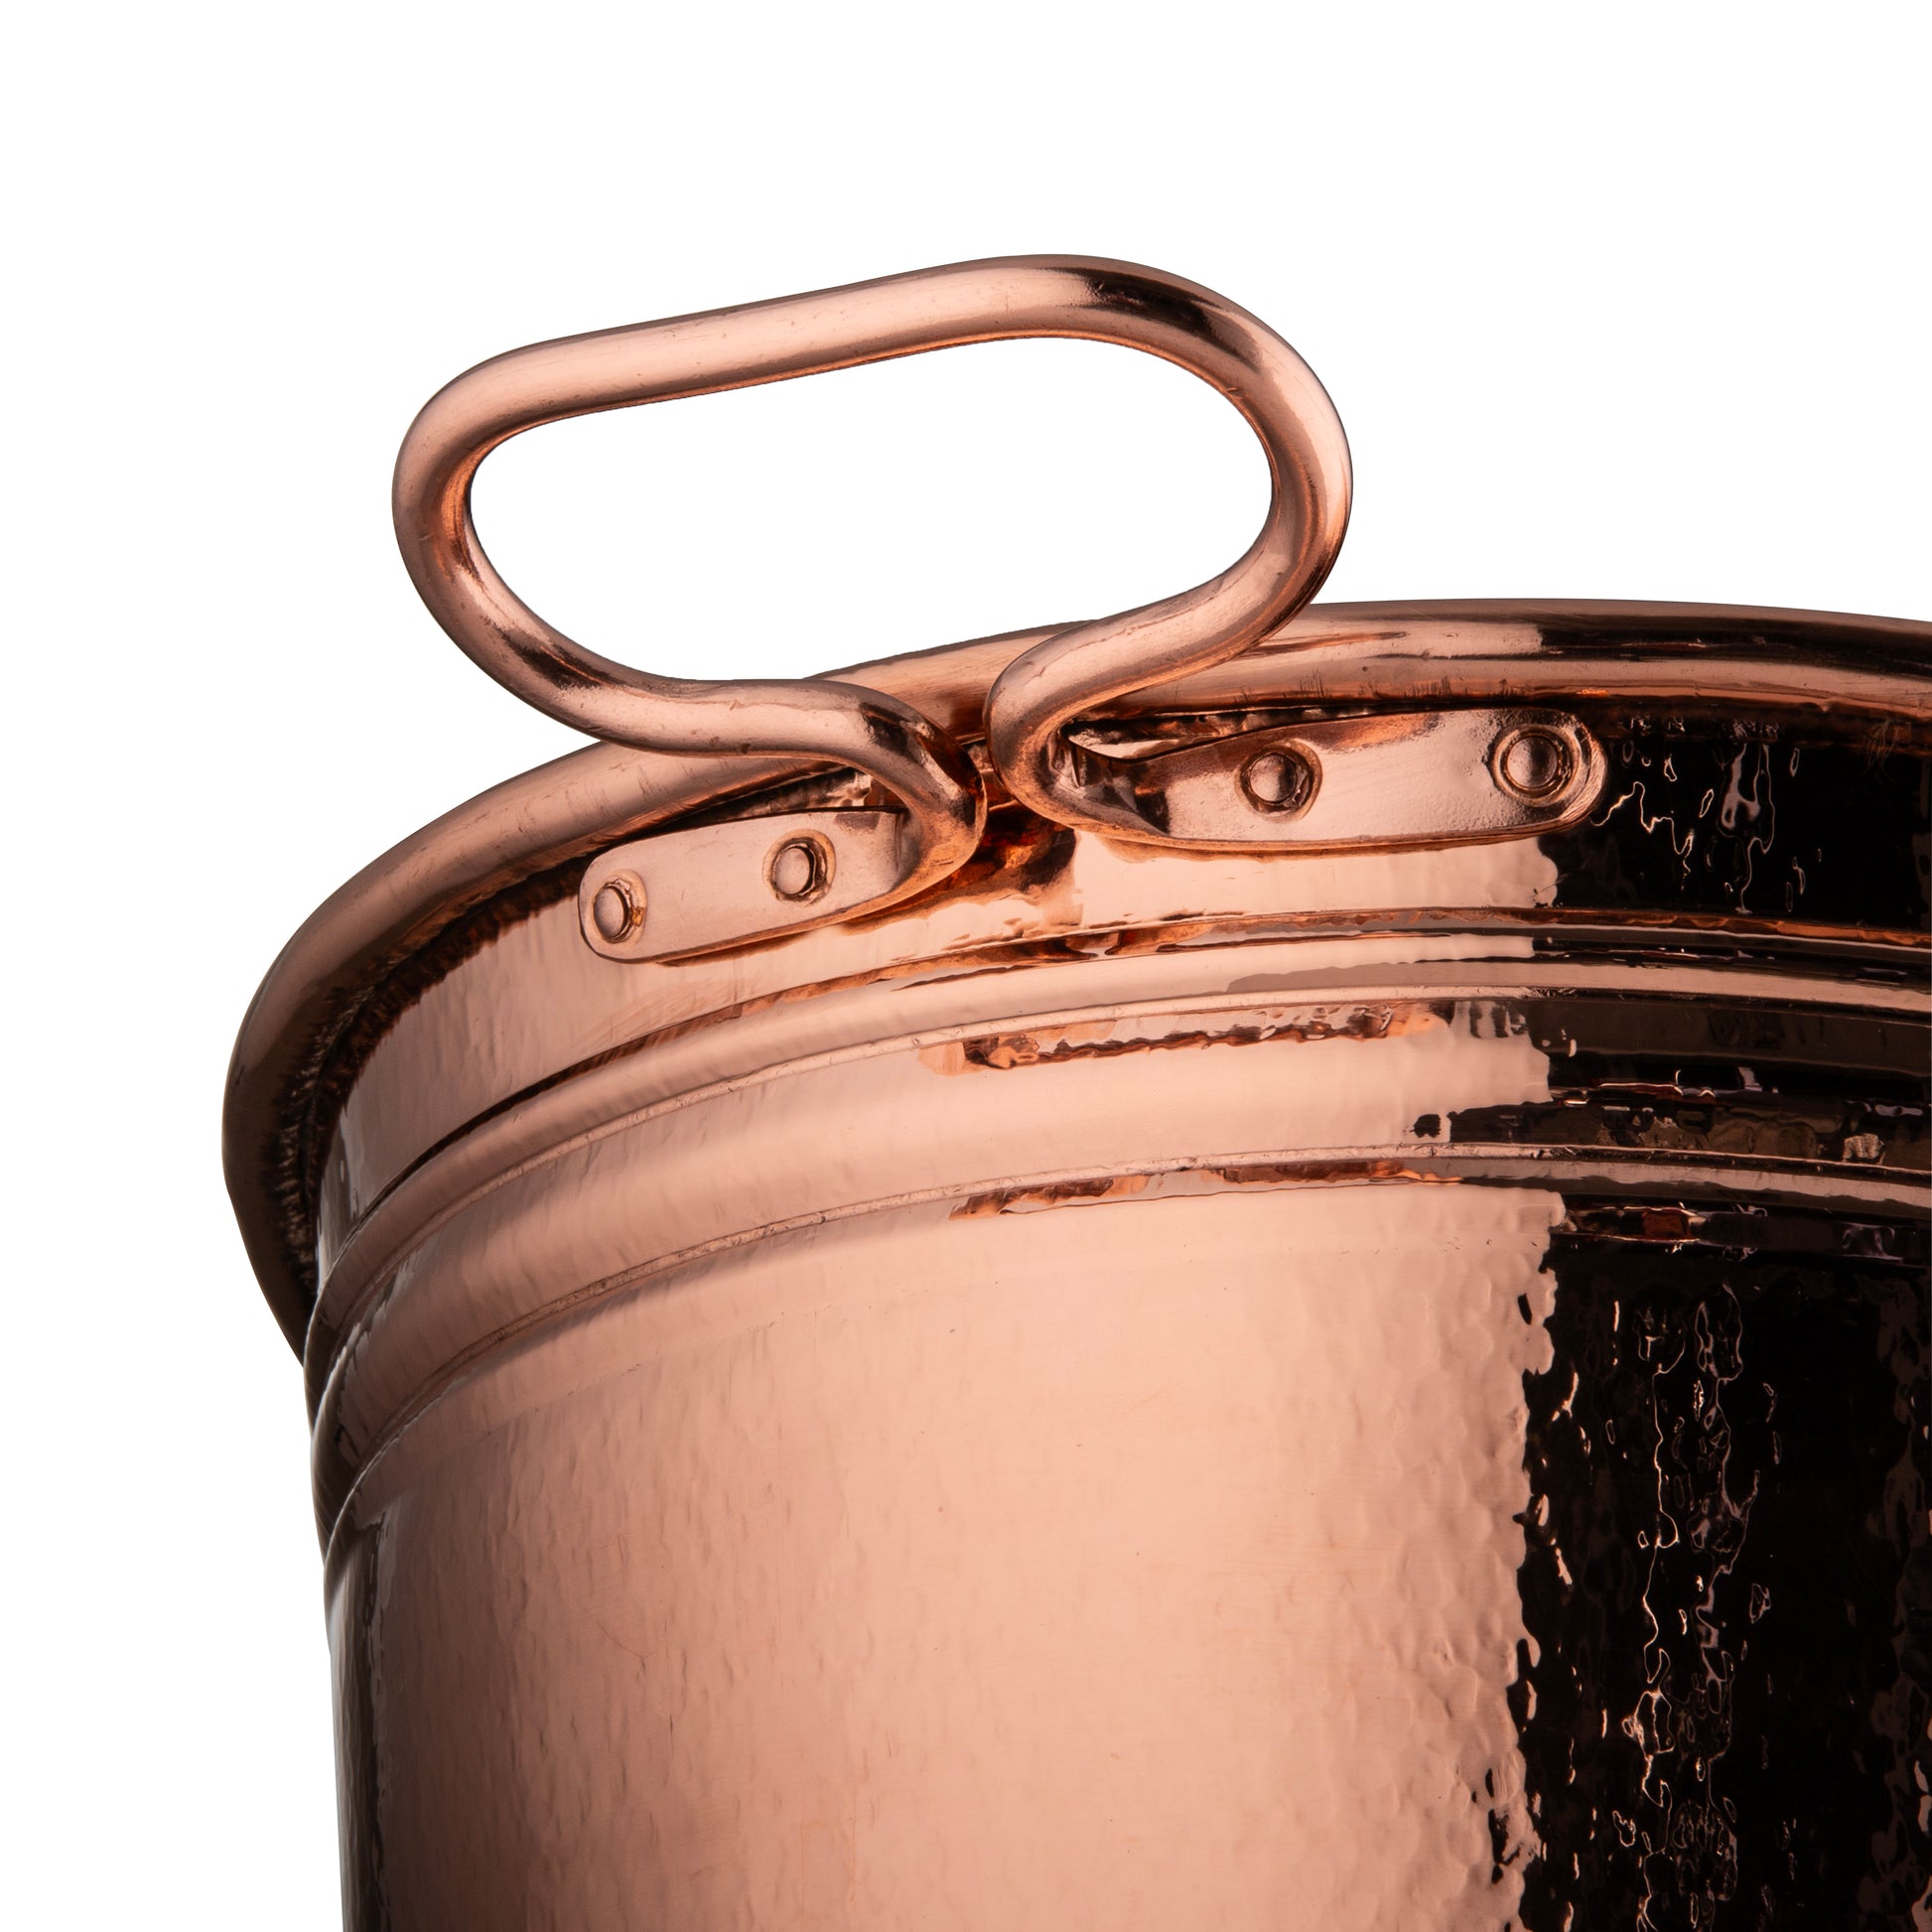 Hammered copper  Large Ice Bucket   and copper handles, from Ruffoni Historia collection